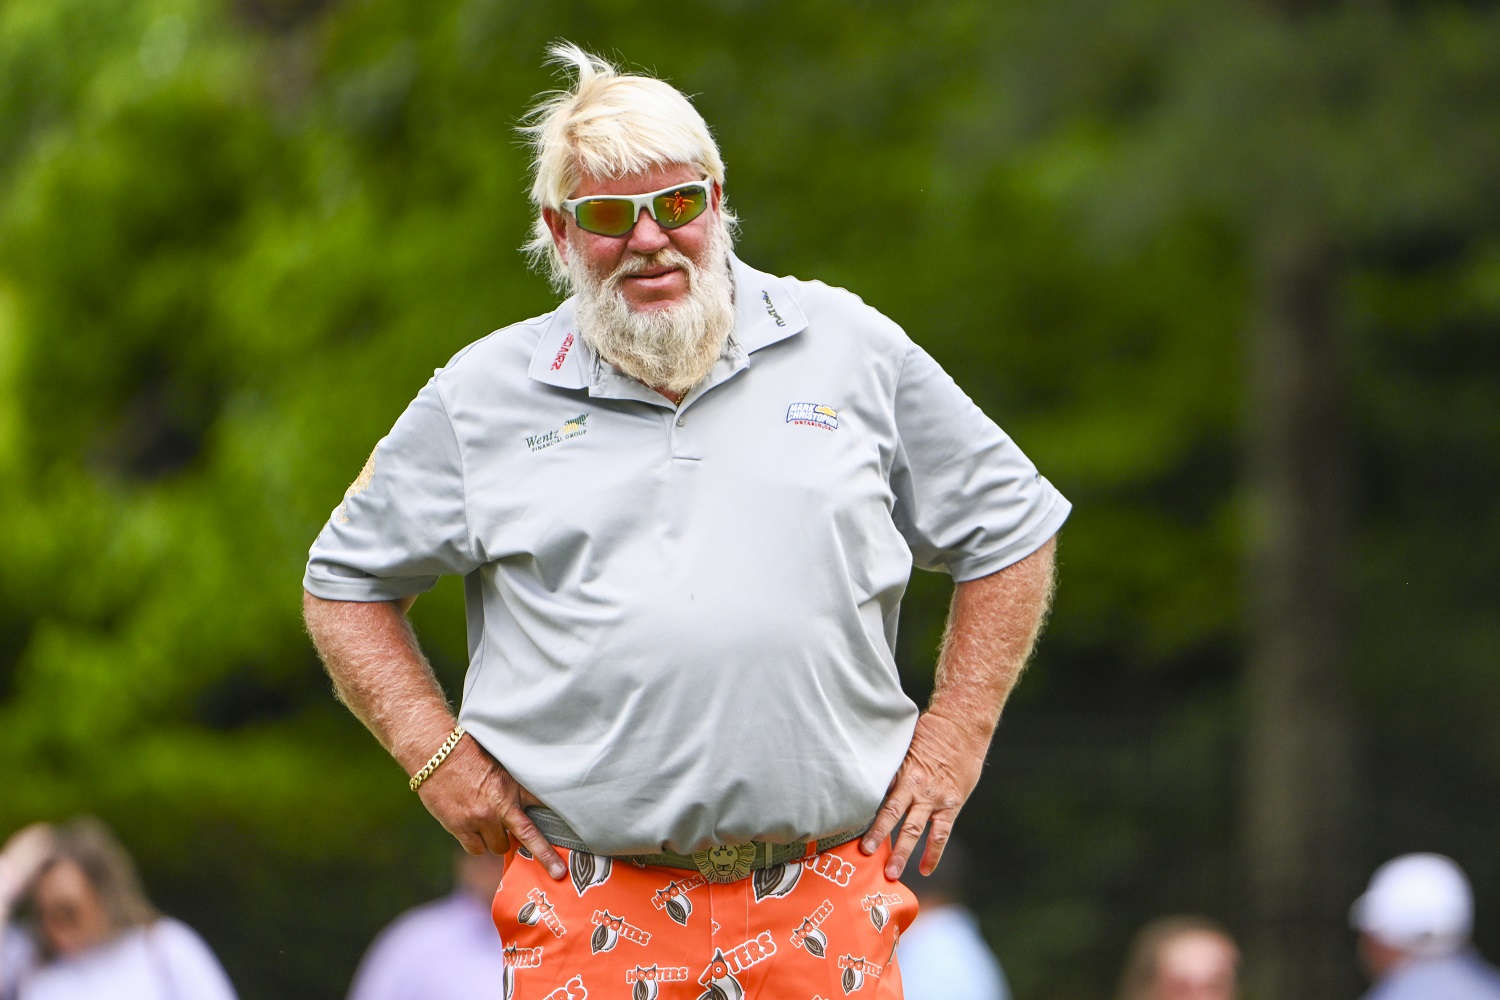 John Daly at the 17th green during the second round of the PGA Tour Champions Regions Tradition at Greystone Golf and Country Club on May 13, 2022.